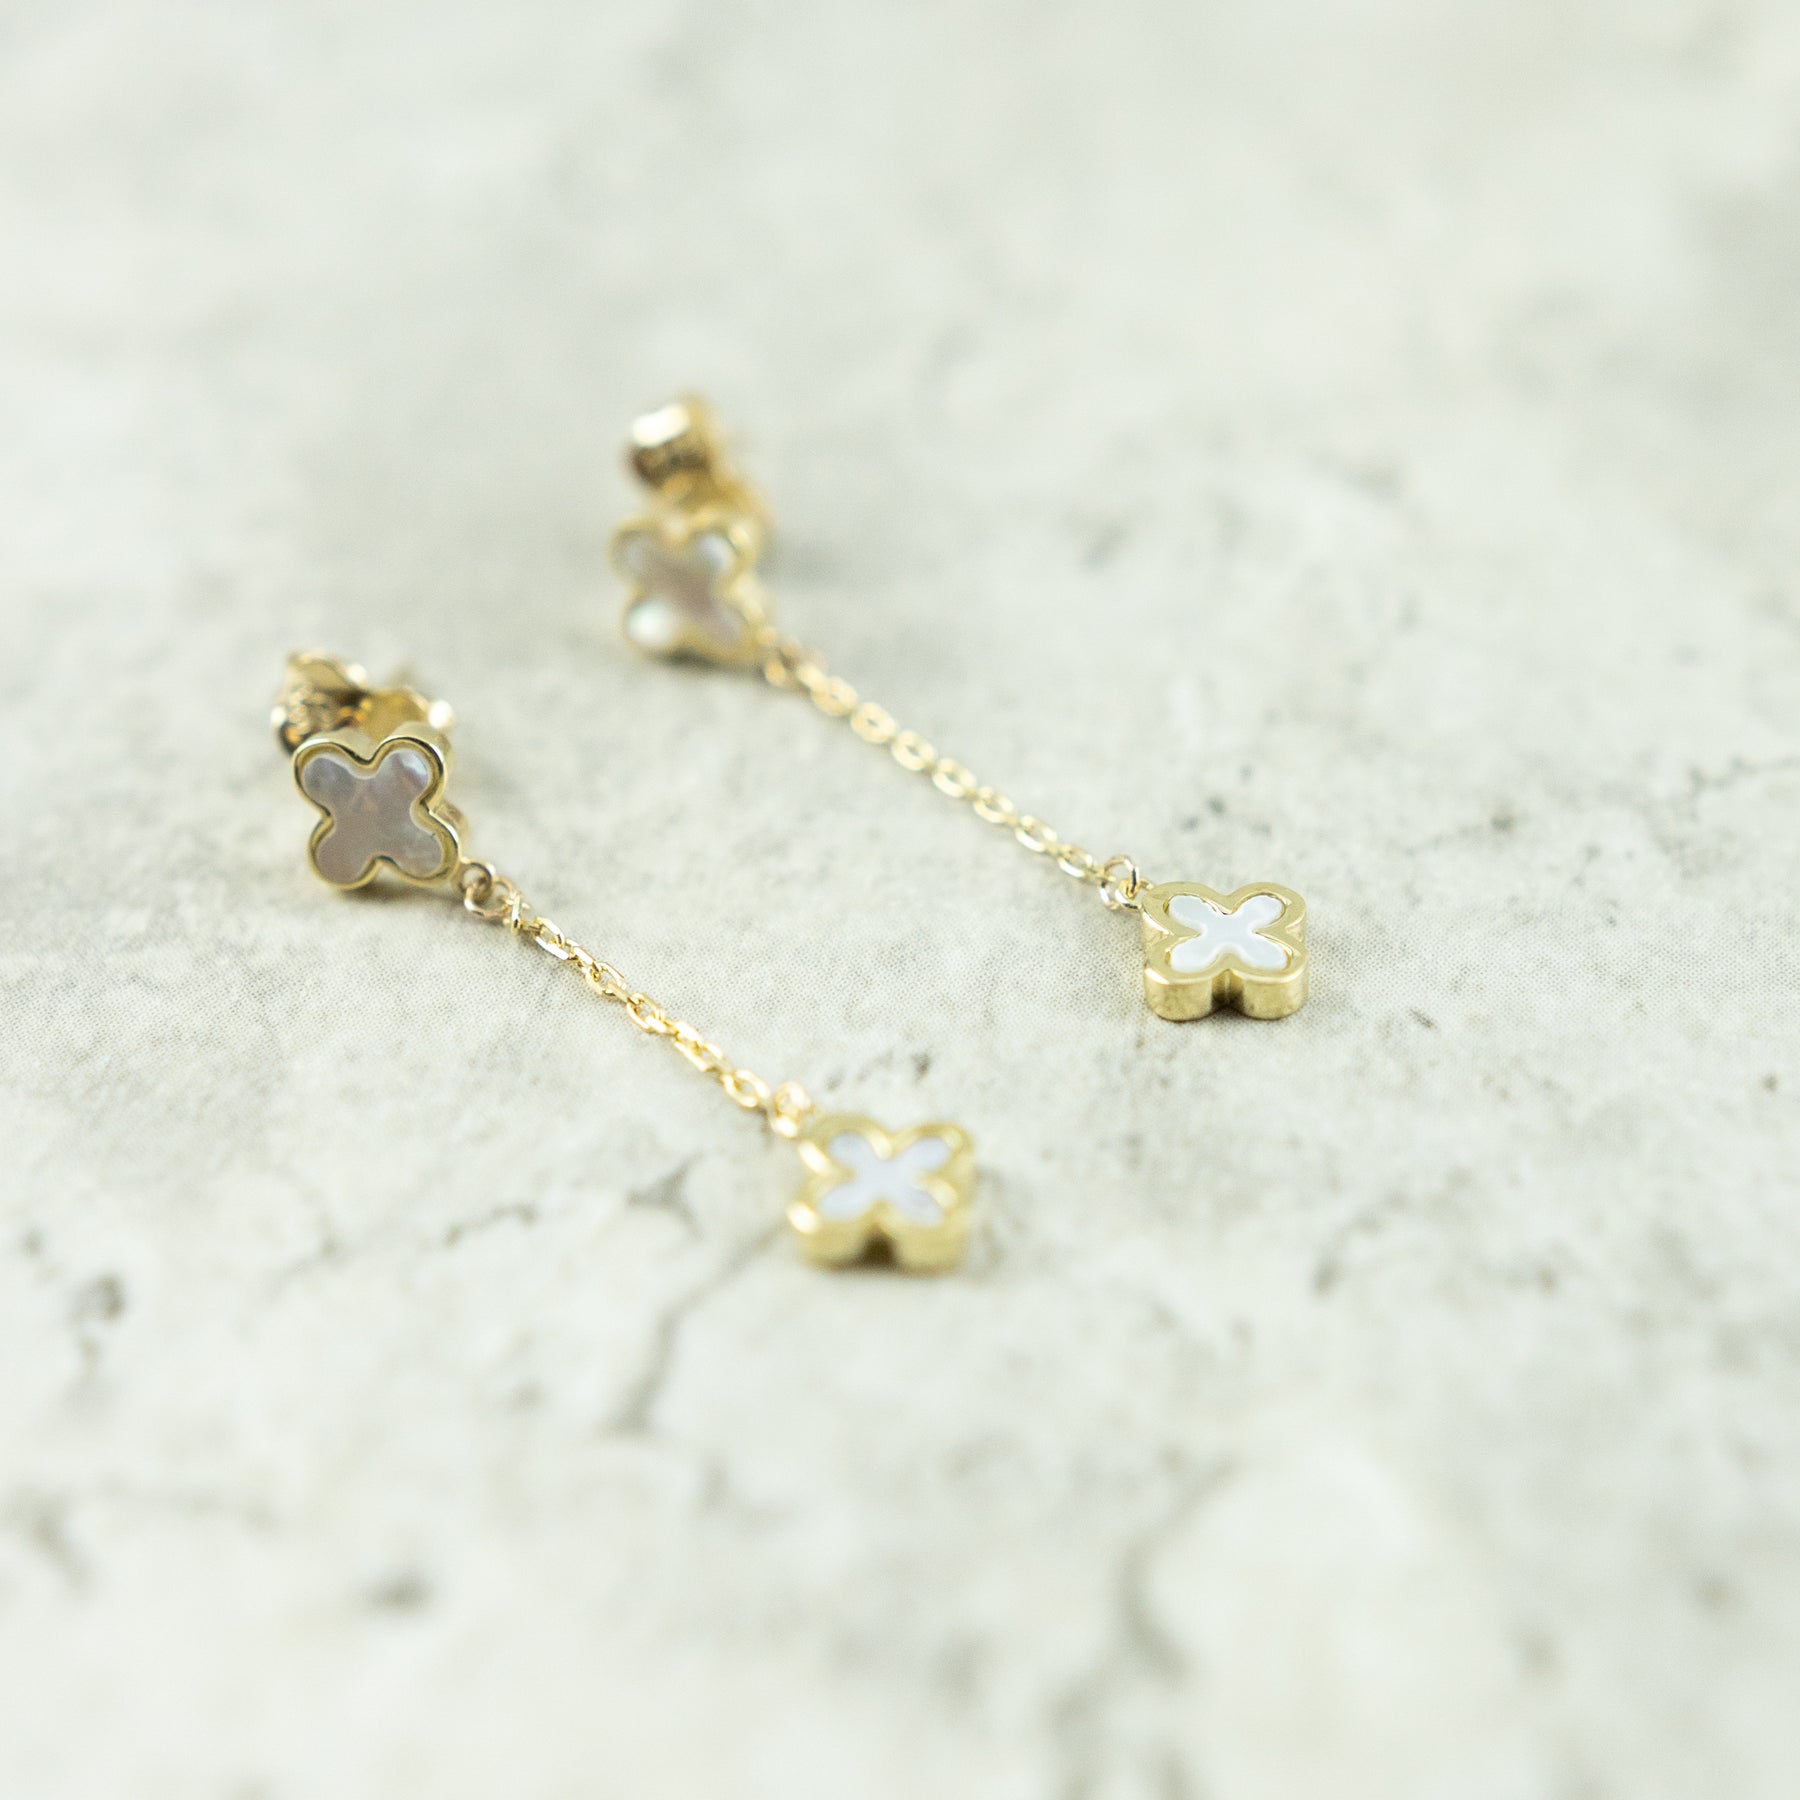 Designer Inspired 9ct Yellow Gold 2 Mother Of Pearl Petal Earrings at RR Jewellers Yarm UK